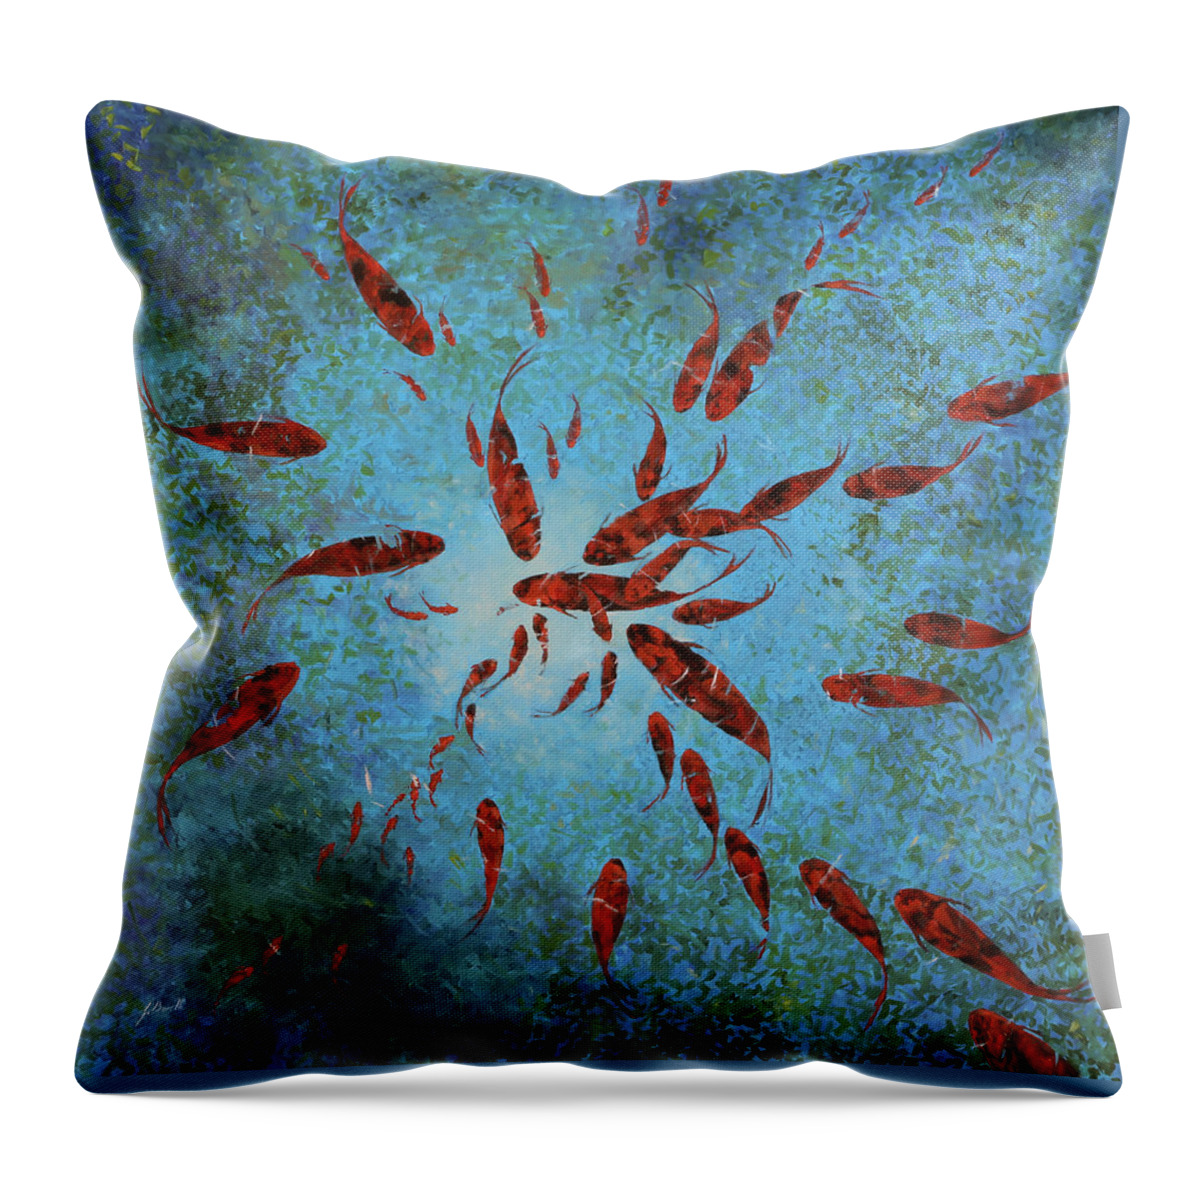 Koi Throw Pillow featuring the painting 63 Pesci Rossi by Guido Borelli